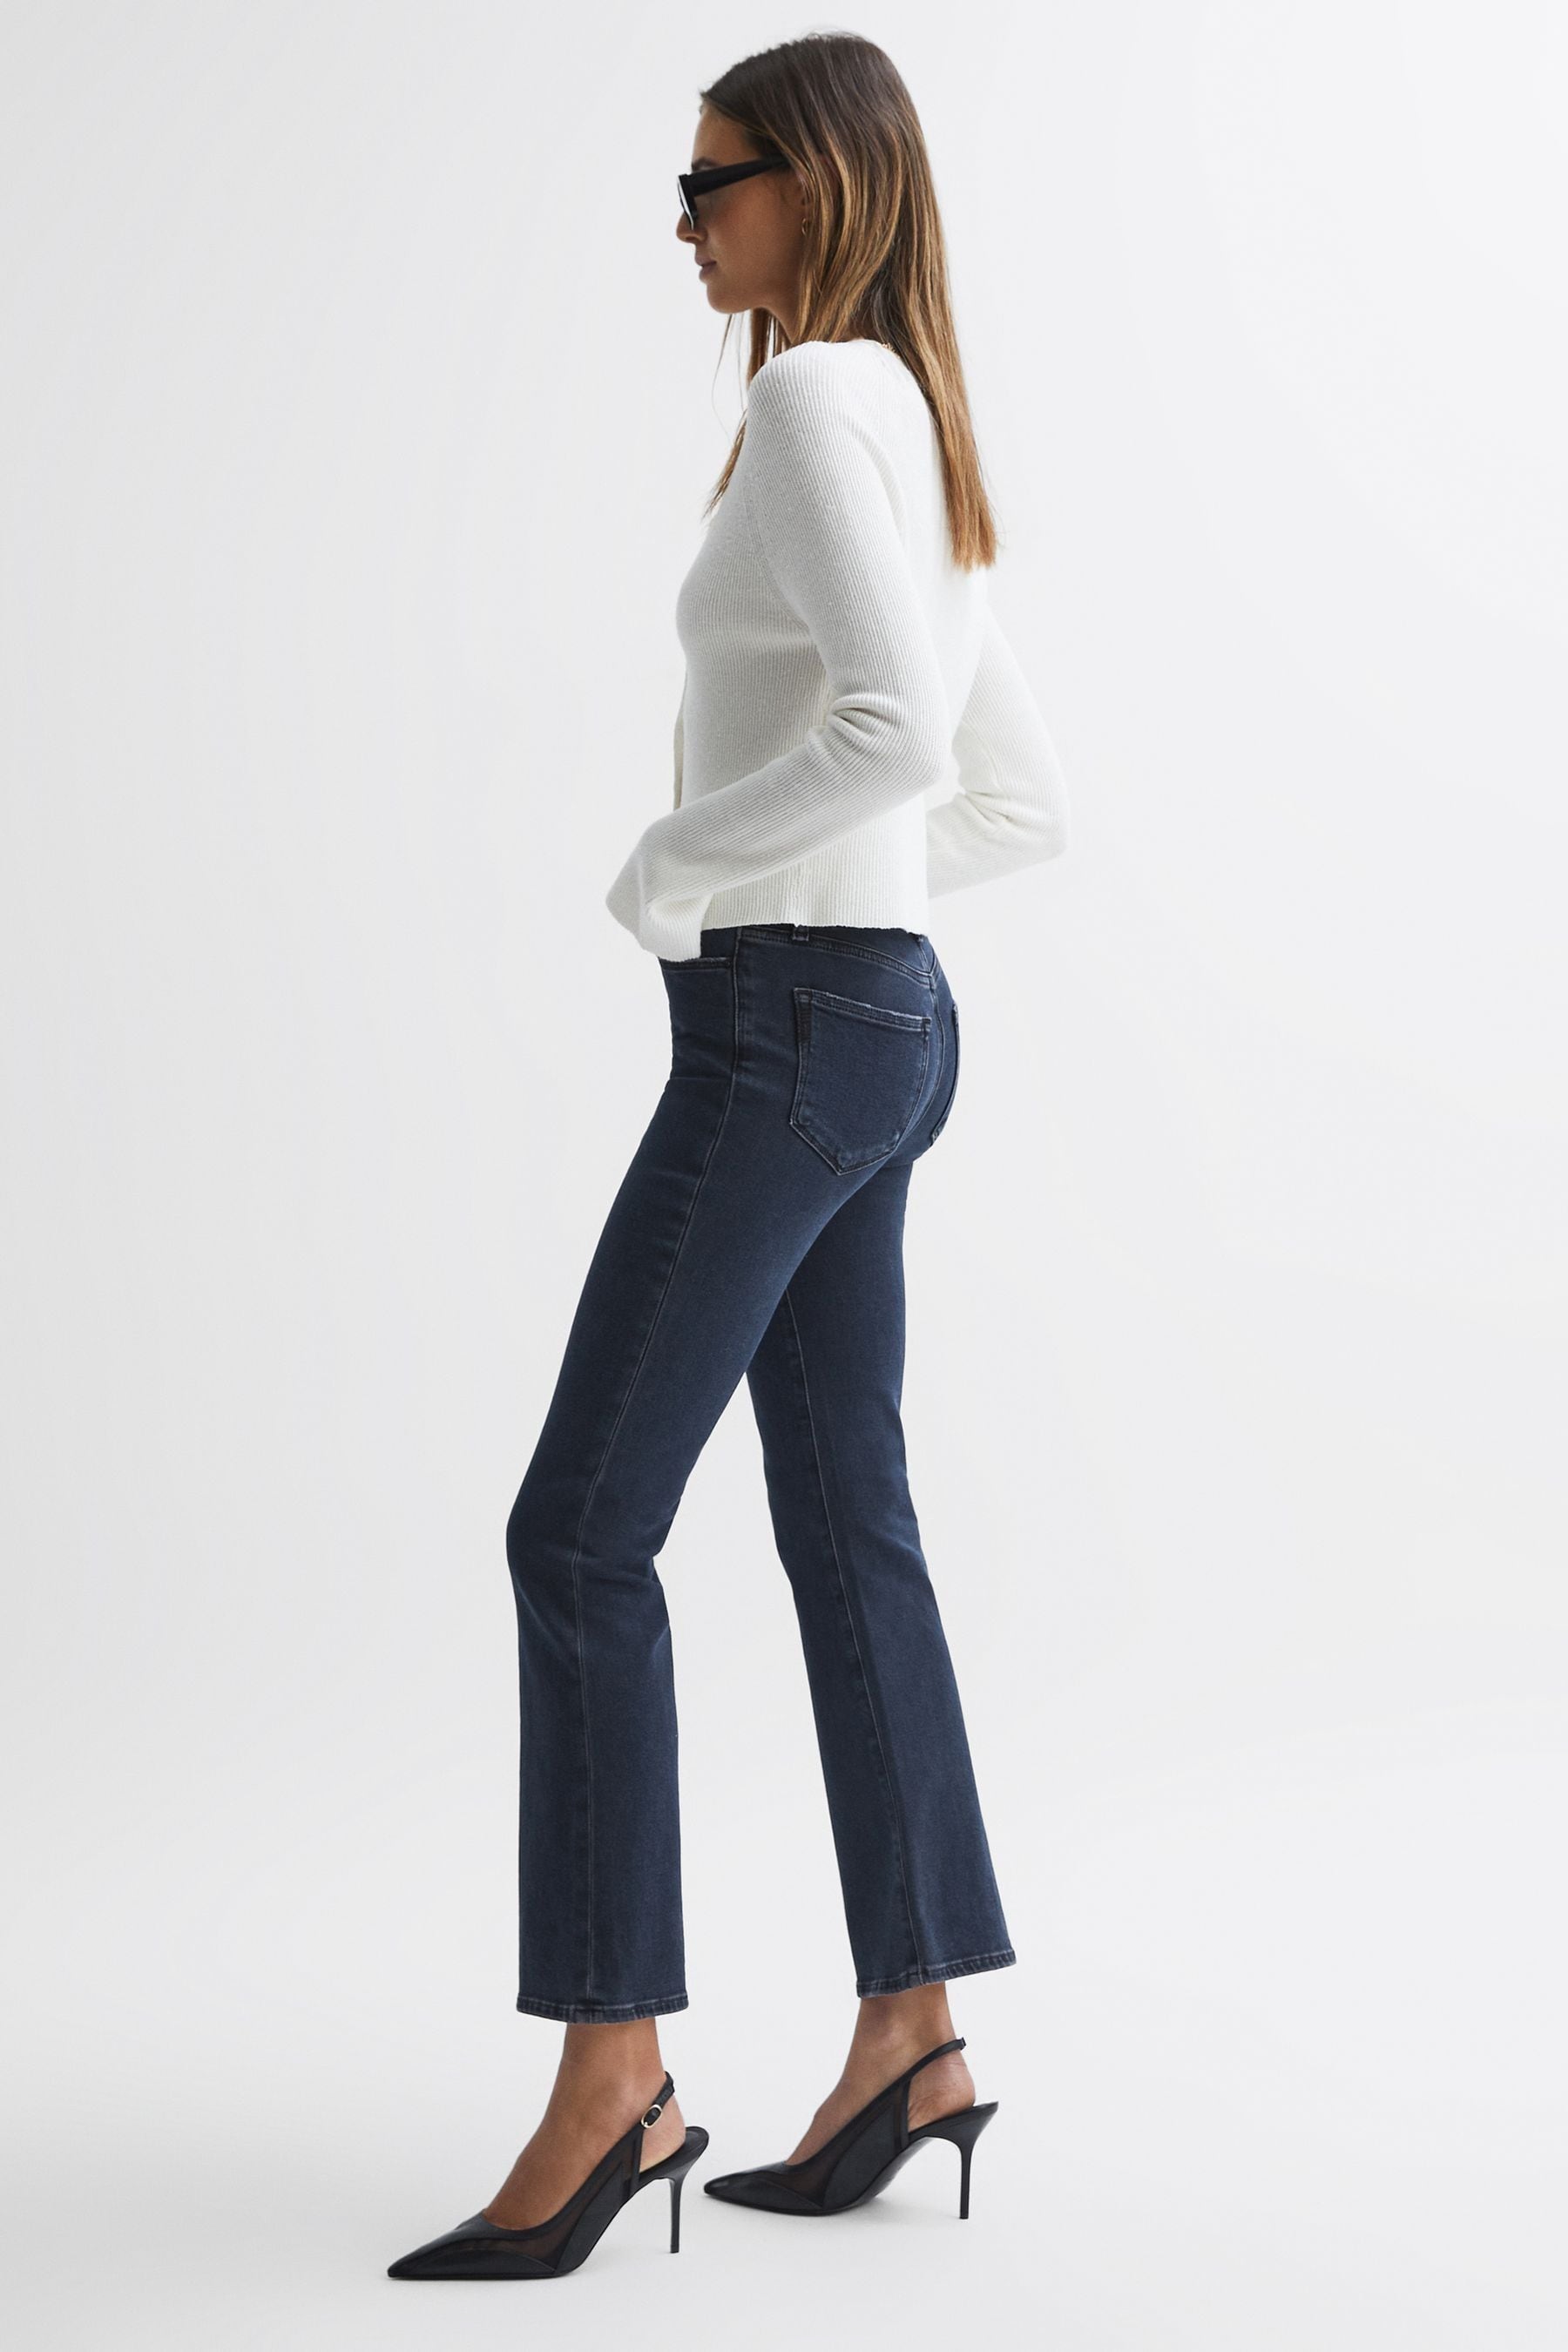 Paige Aster Claudine  High Rise Flared Jeans